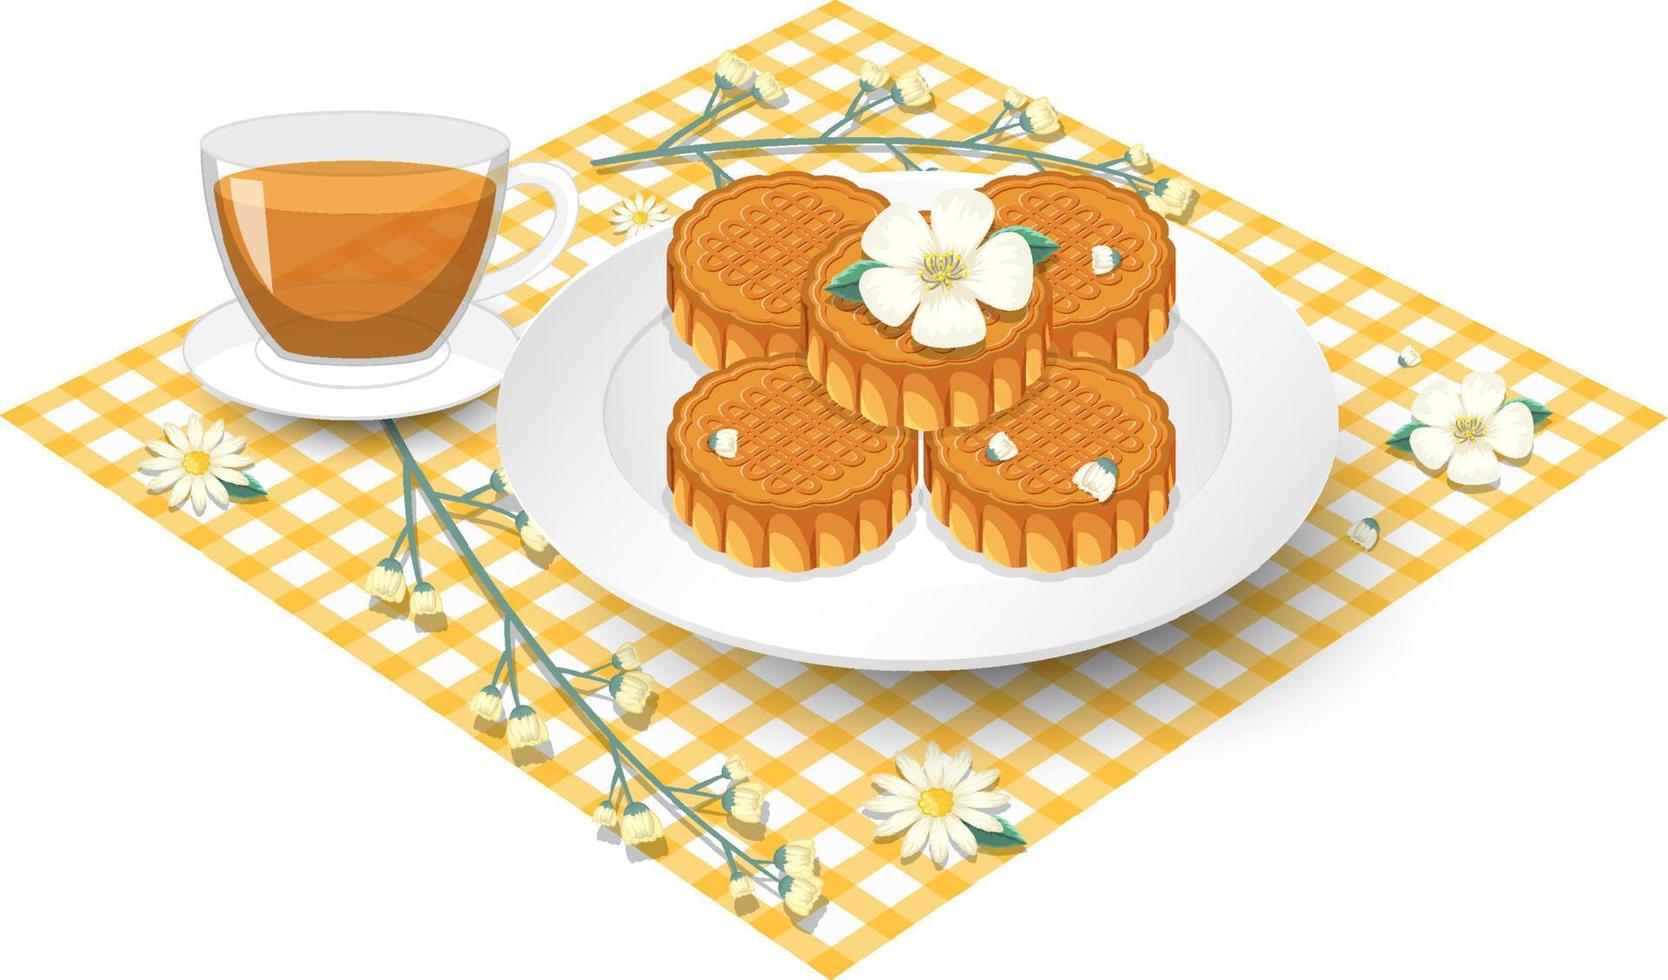 Pile of mooncakes with teacup set on tablecloth vector